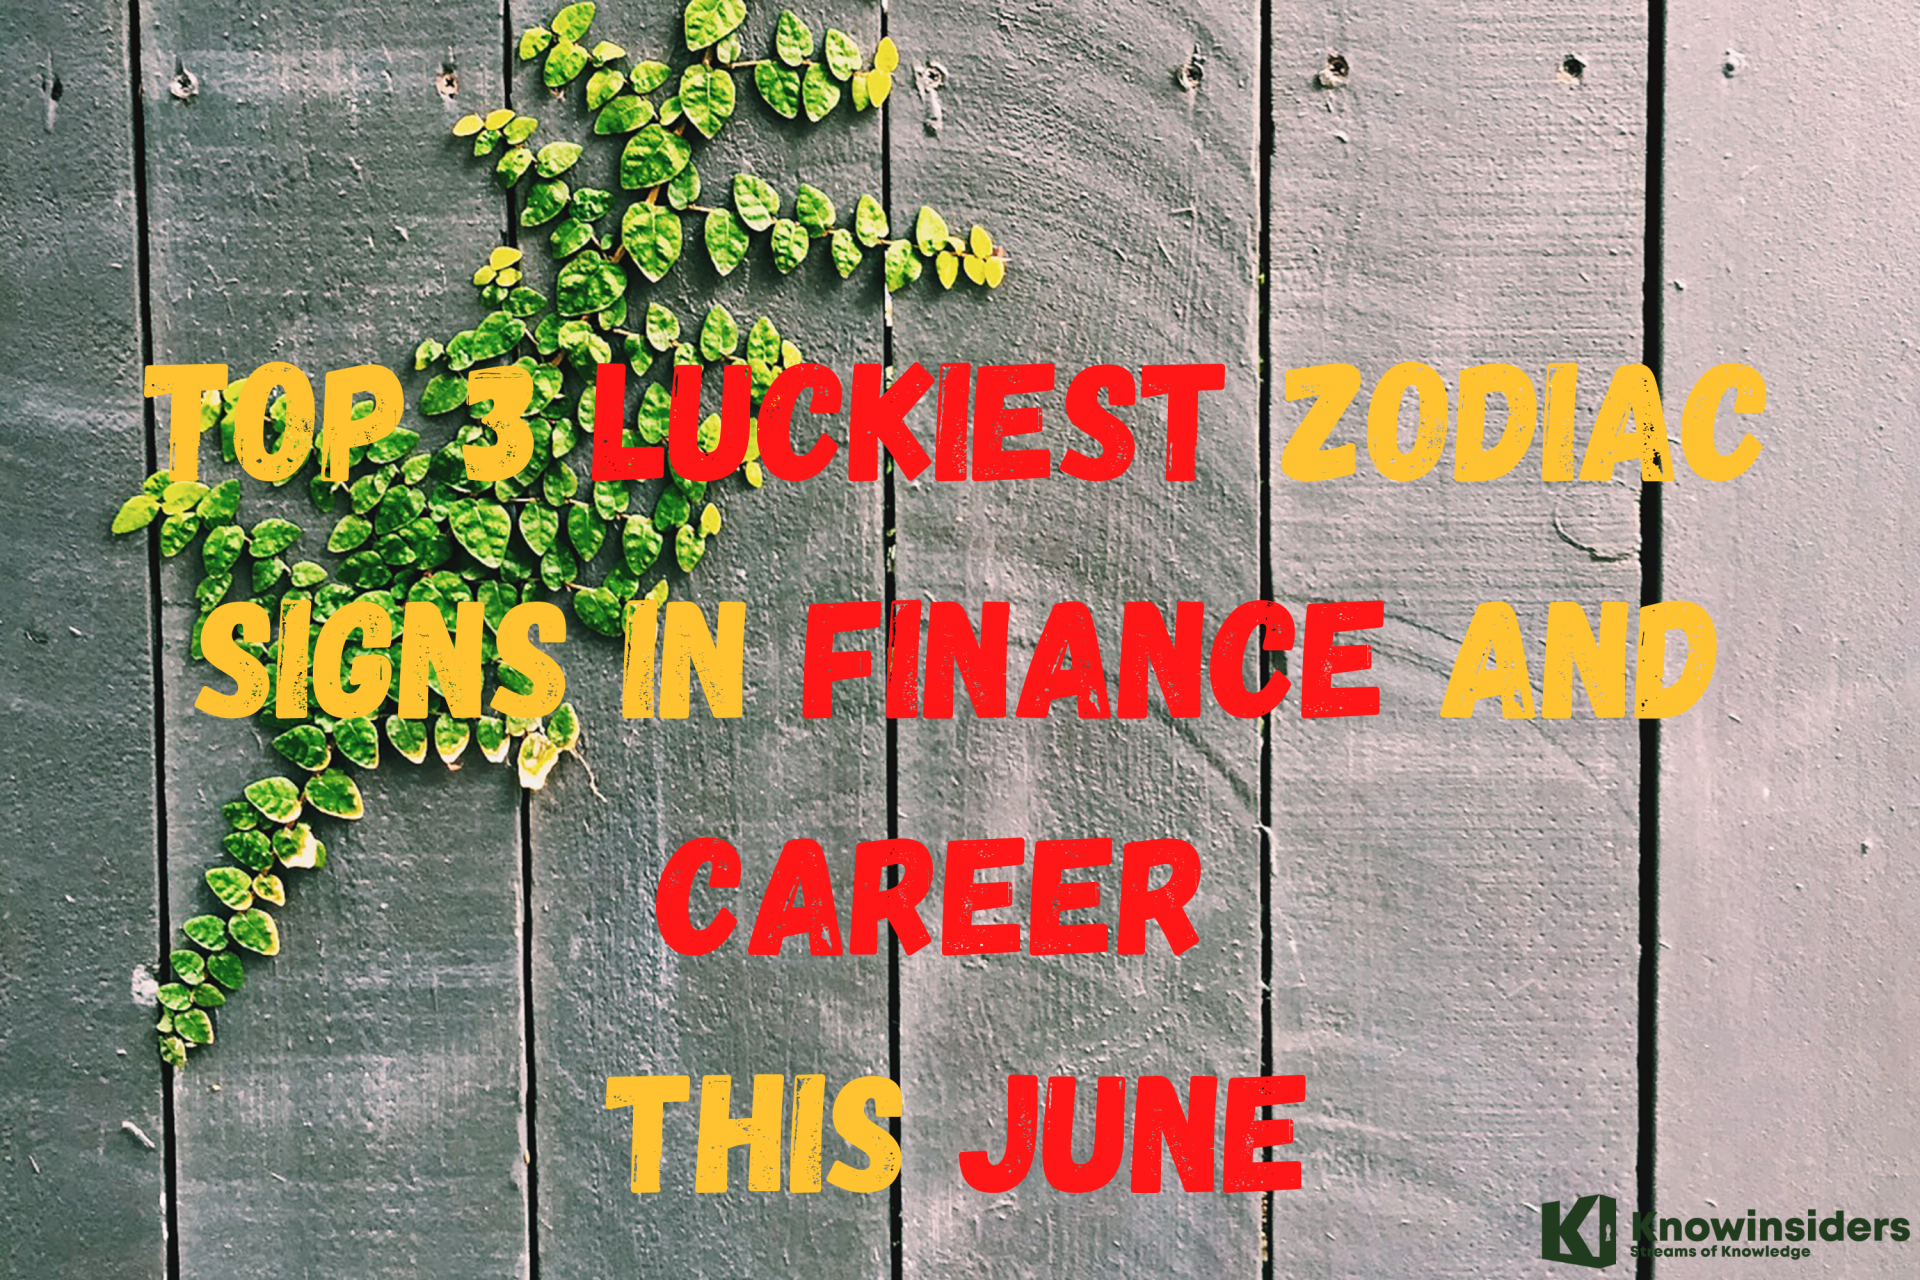 Top 3 Zodiac Signs Are Going Rich and Successful This June